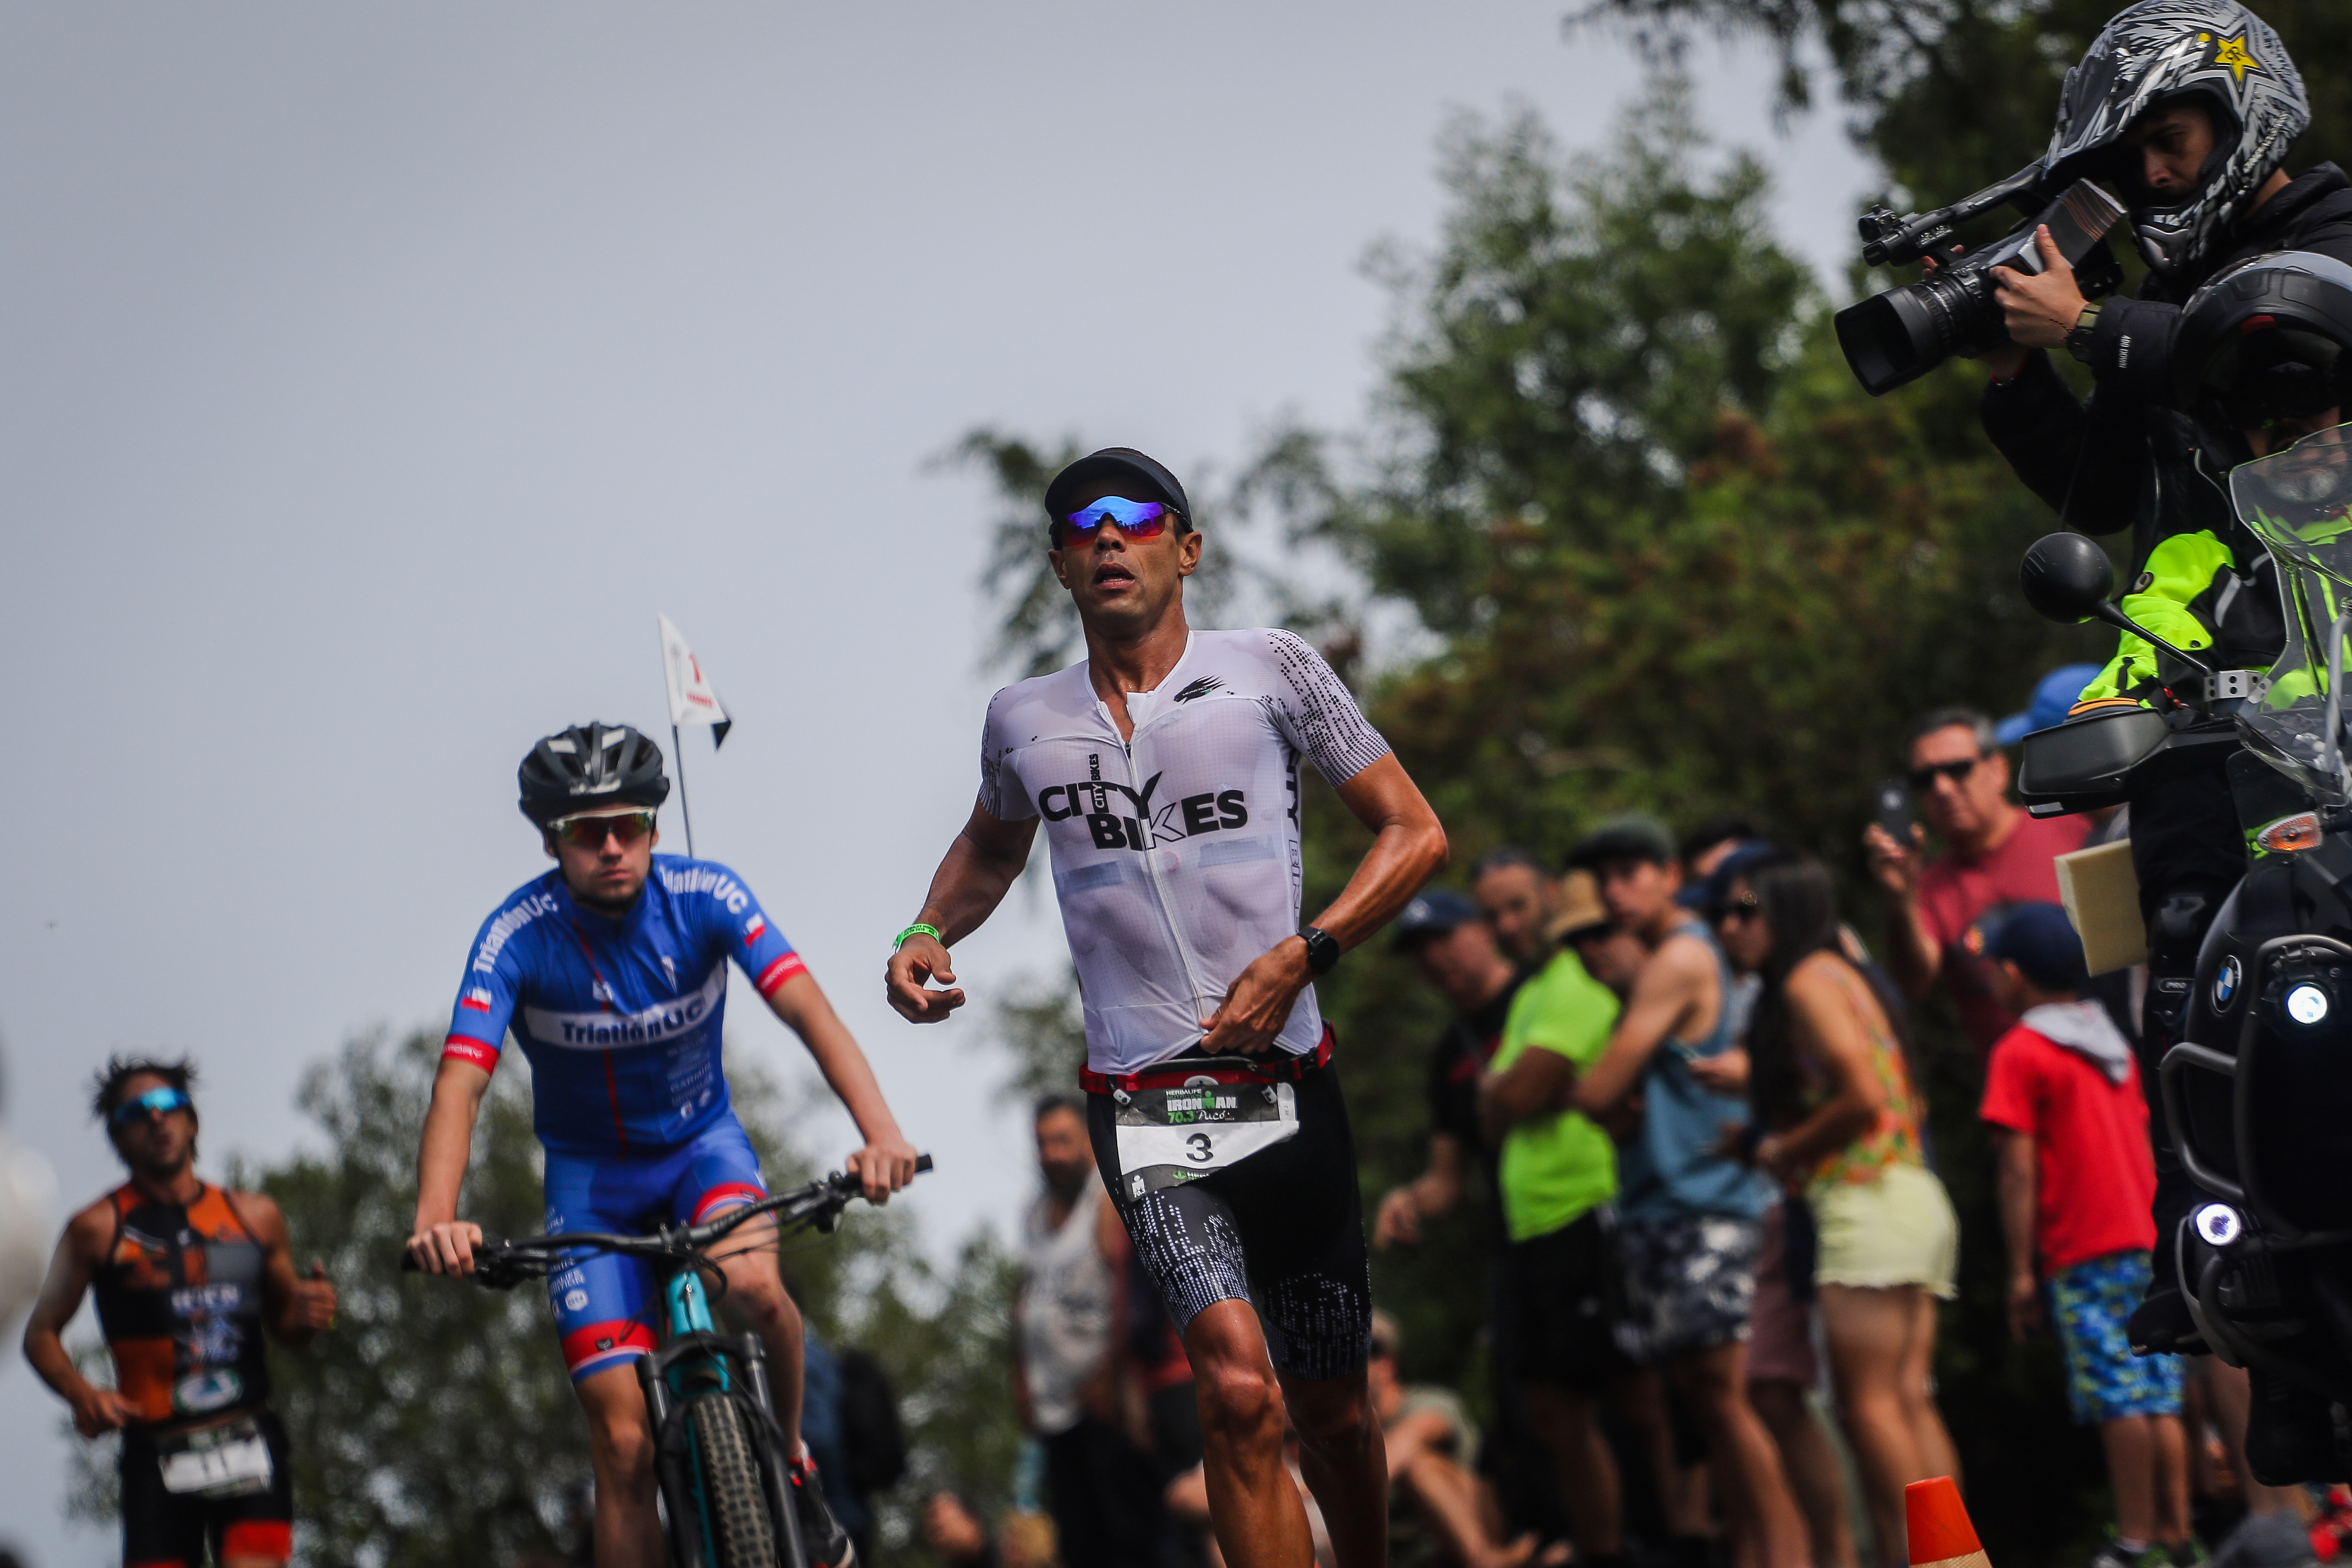 Pucon: Herbalife Ironman 70.3 Pucon 2019